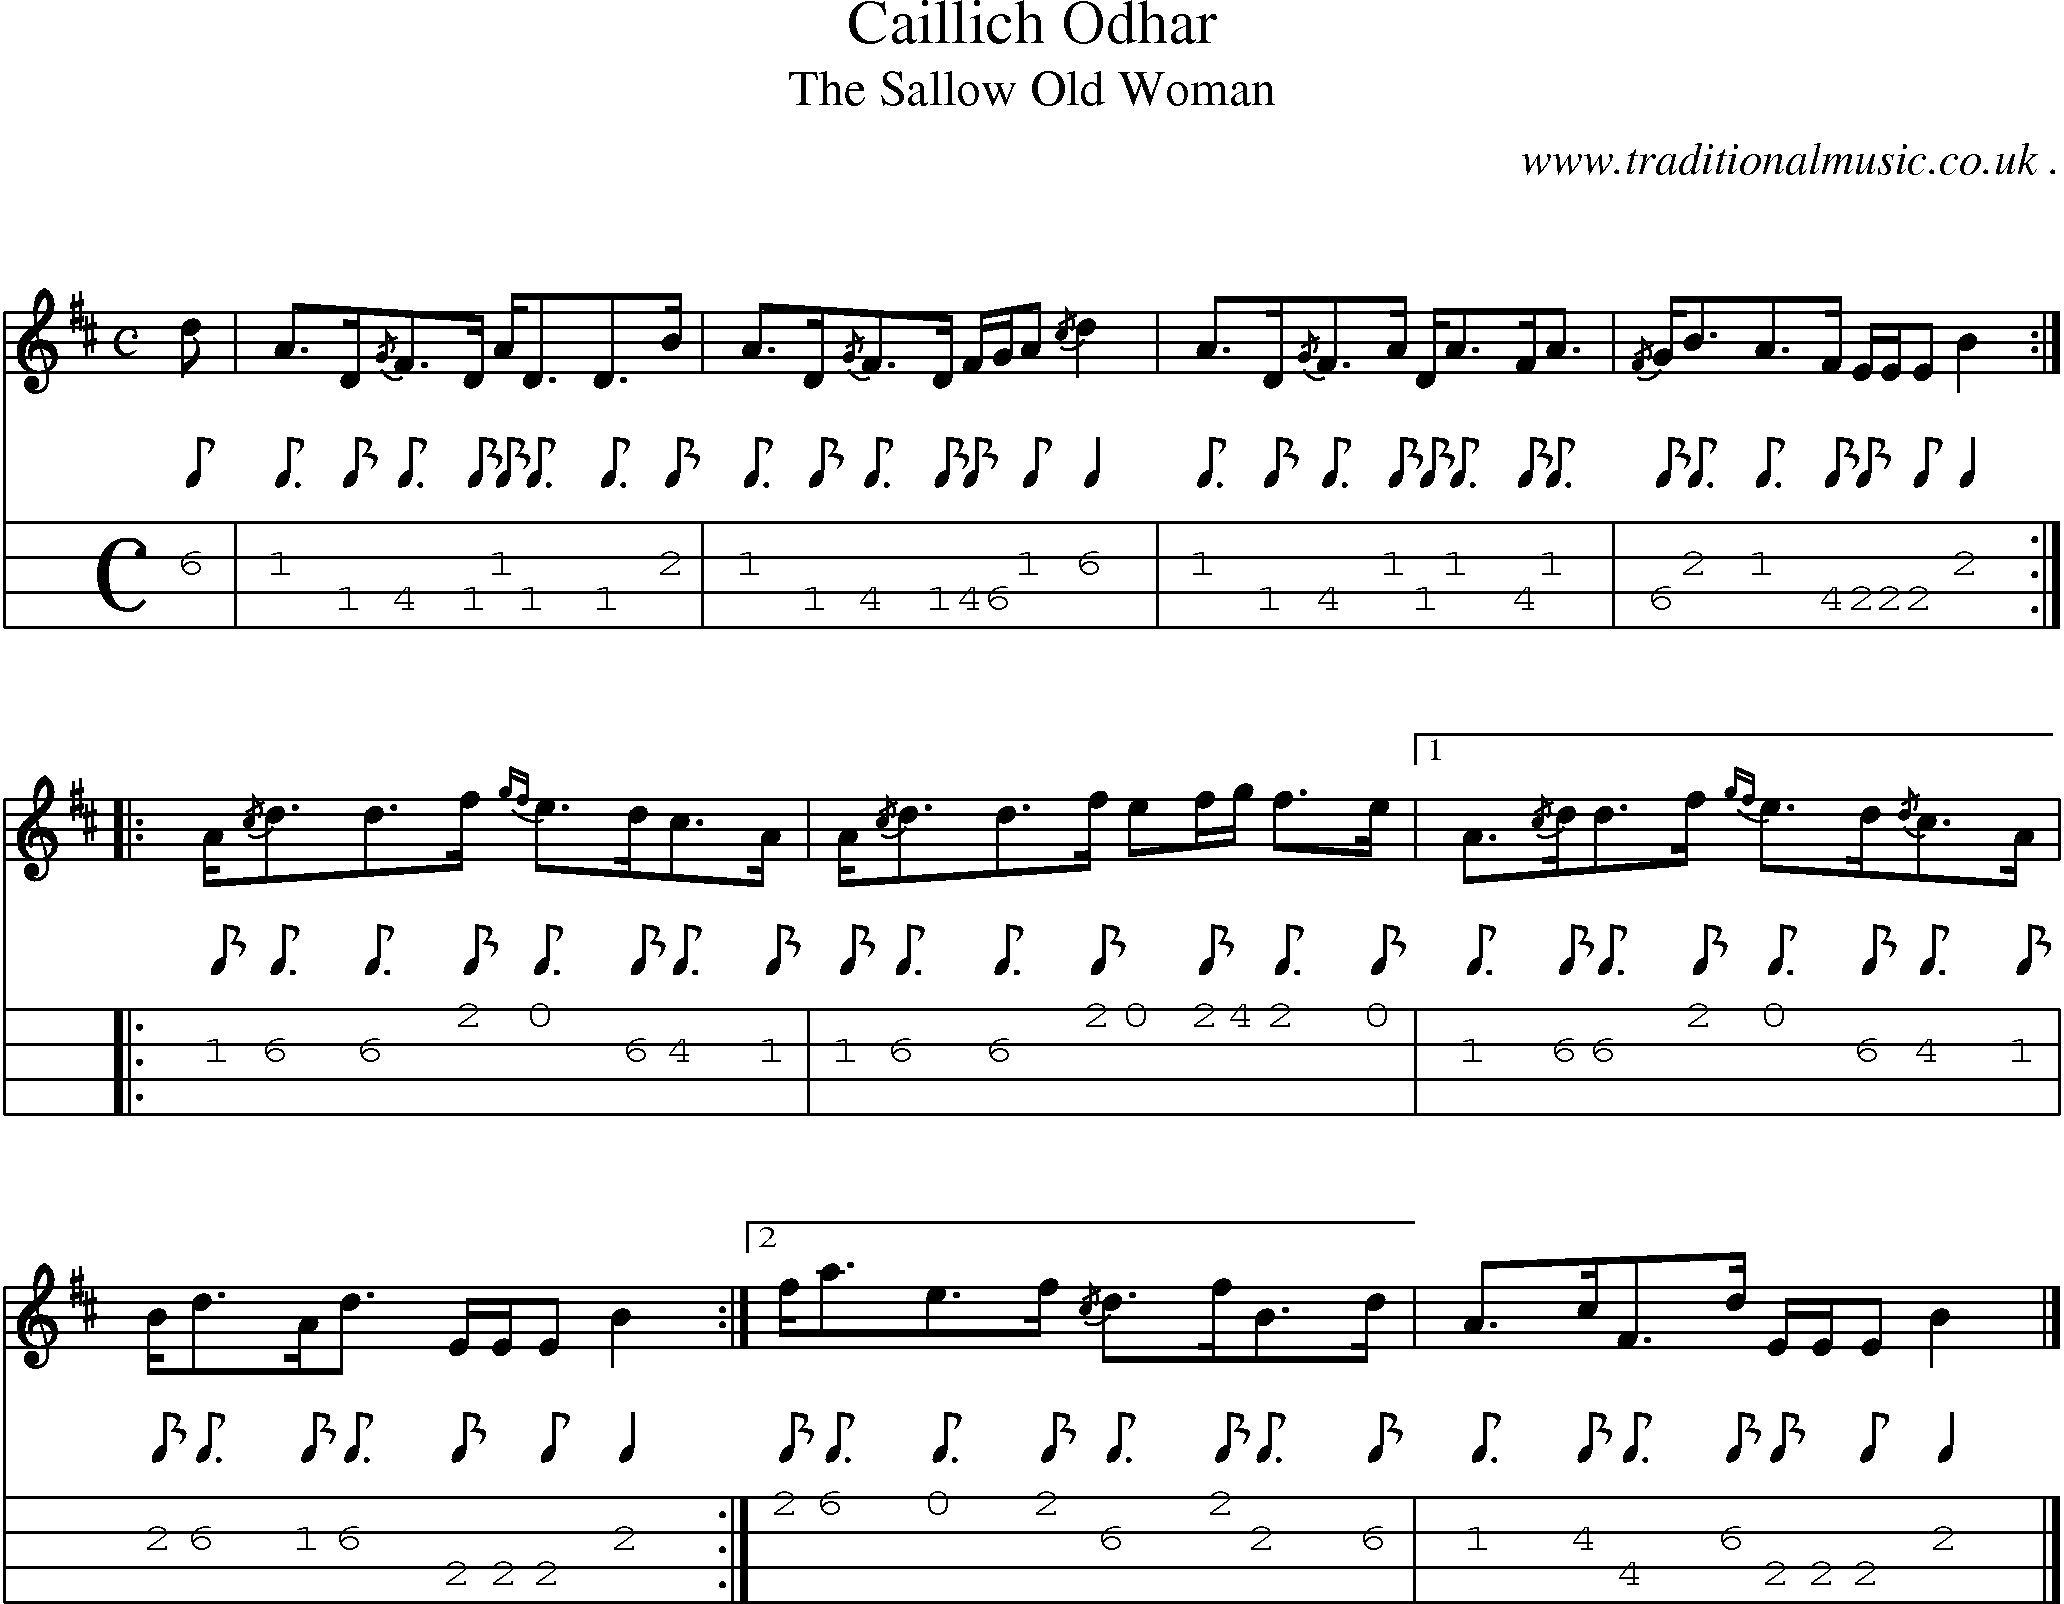 Sheet-music  score, Chords and Mandolin Tabs for Caillich Odhar